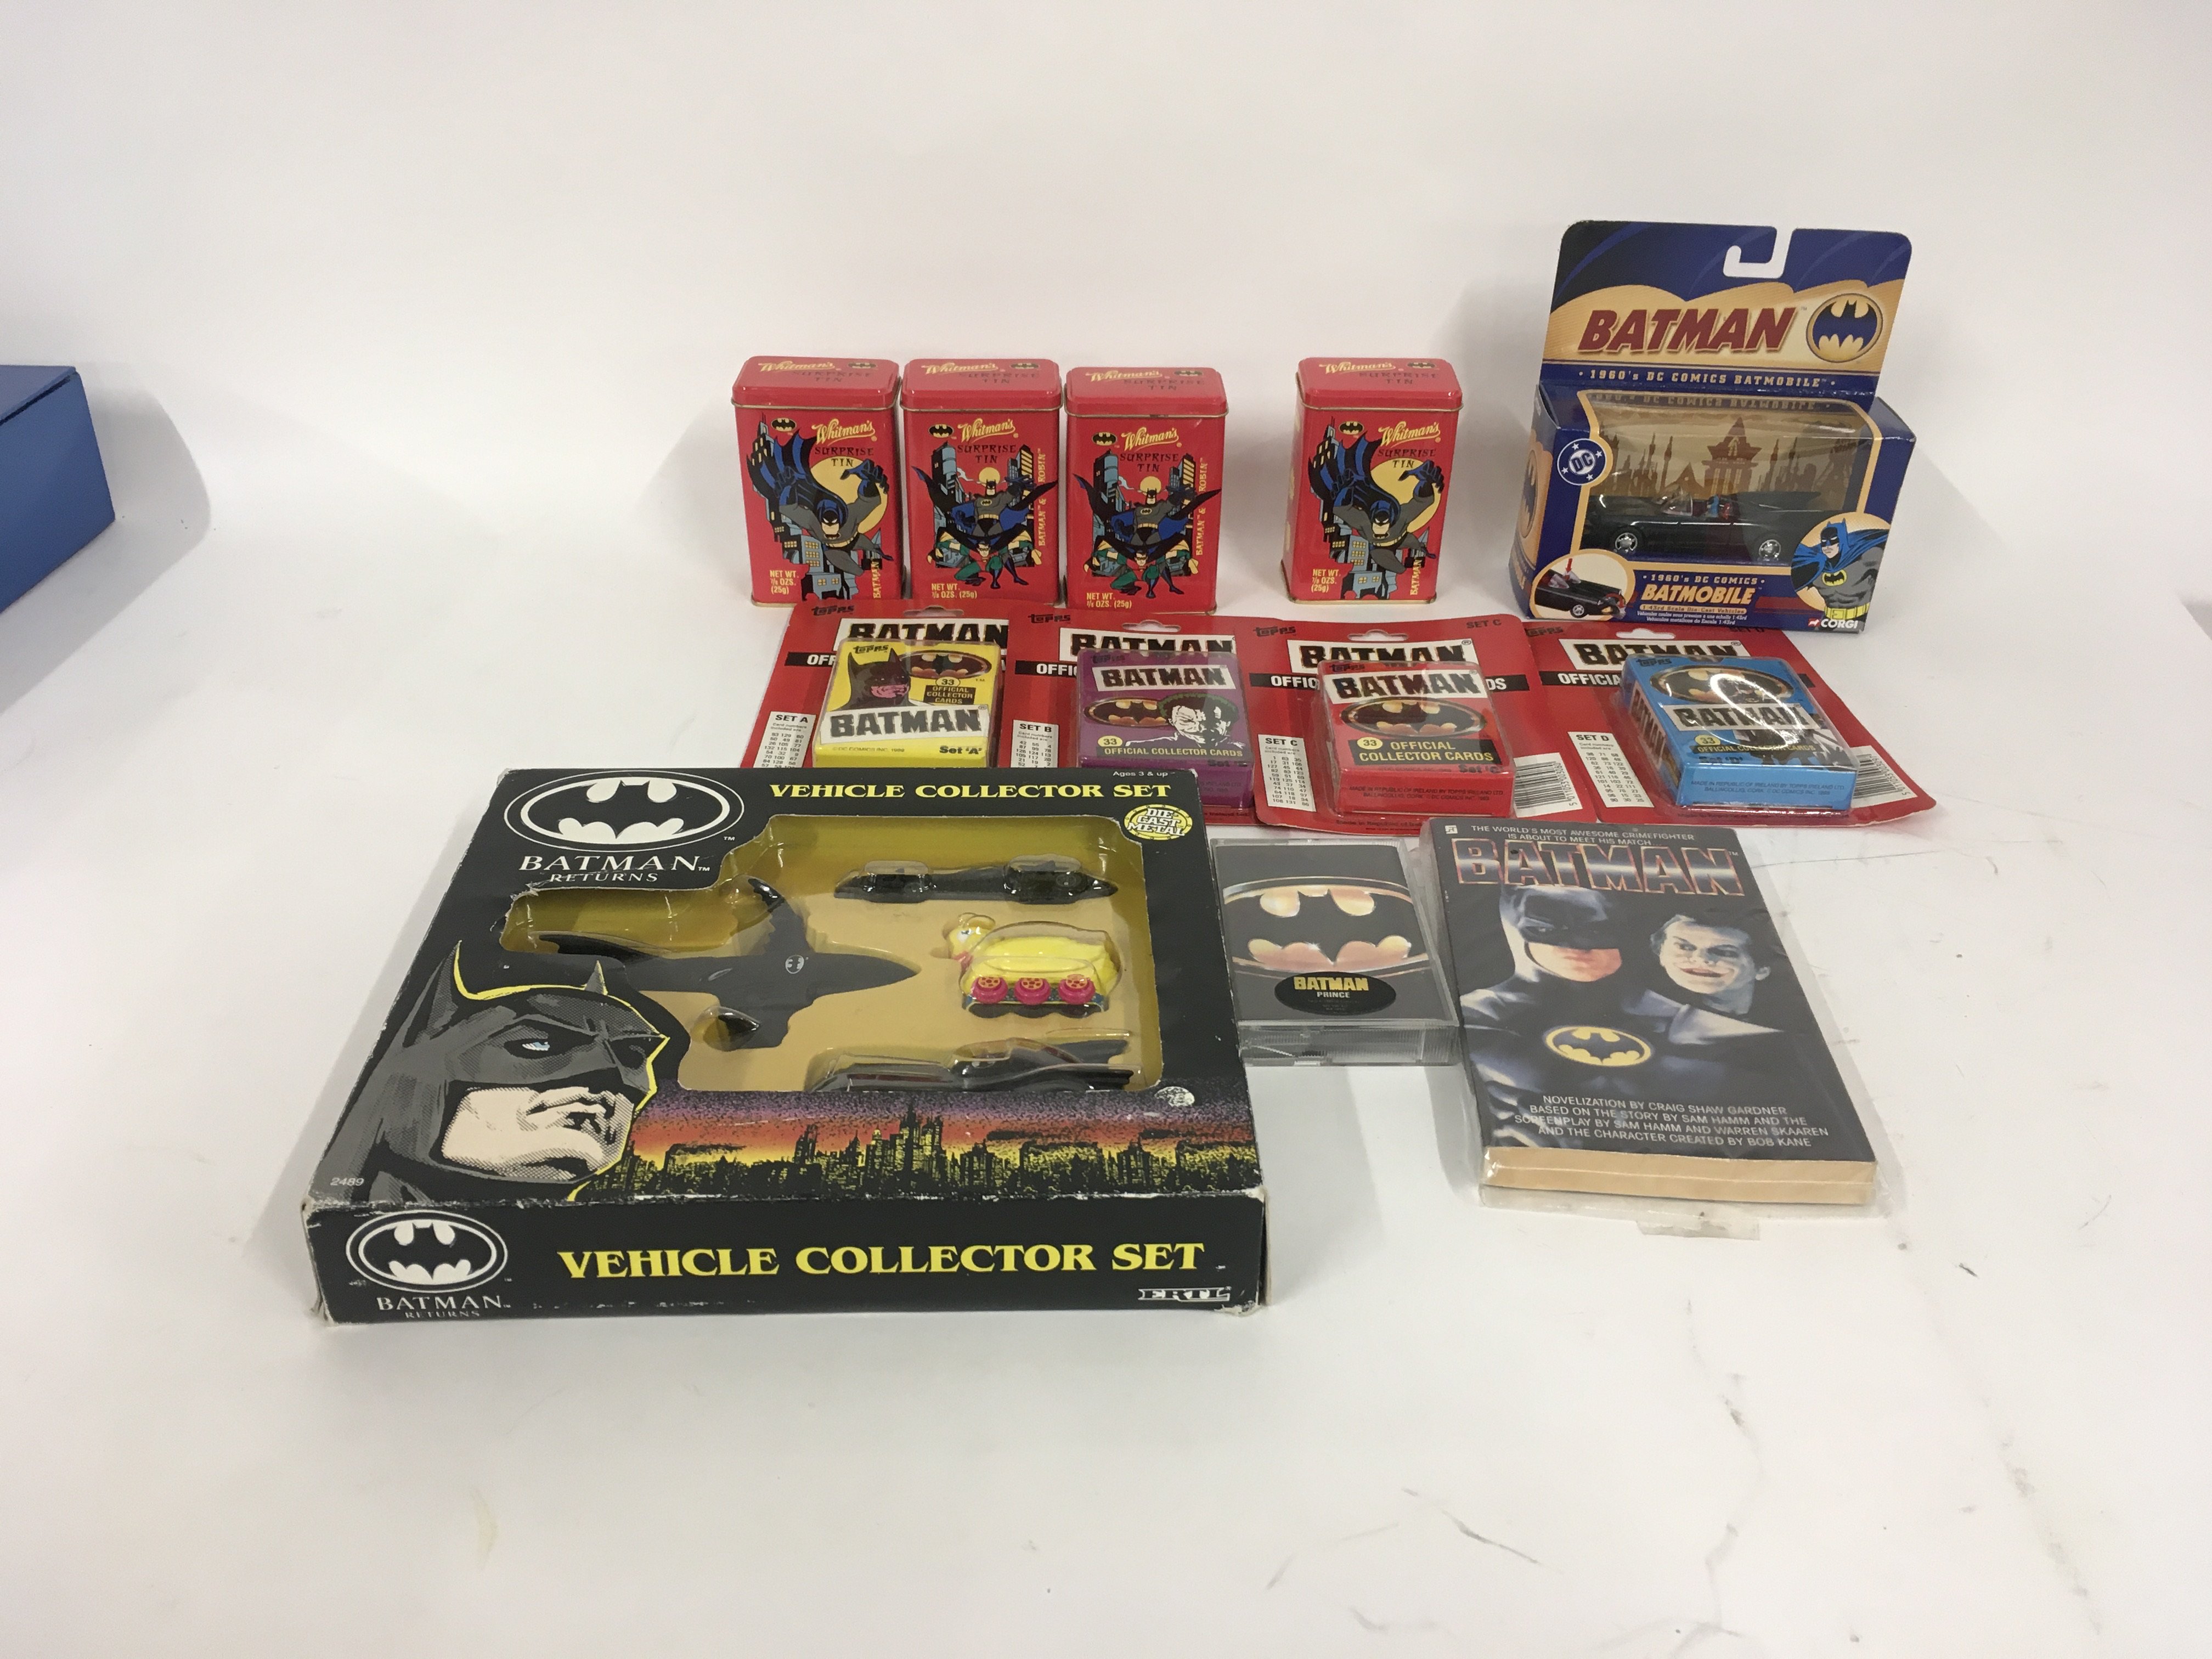 A collection of Batman related items including die